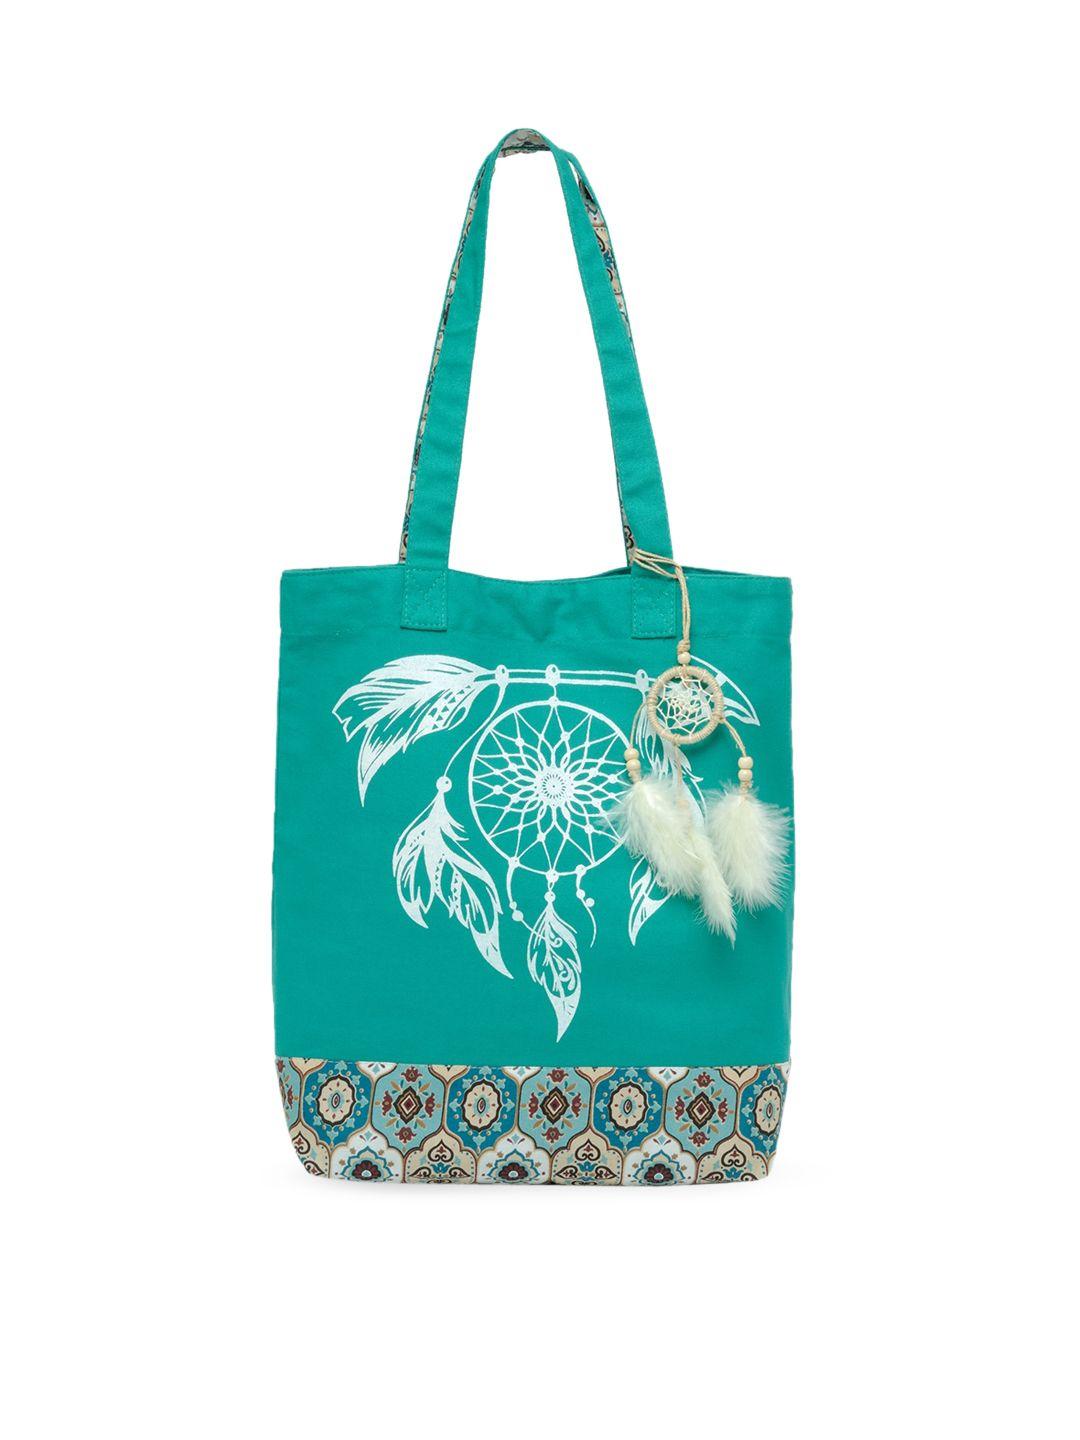 the house of tara teal and white canvas tribal motif printed shopper tote bag